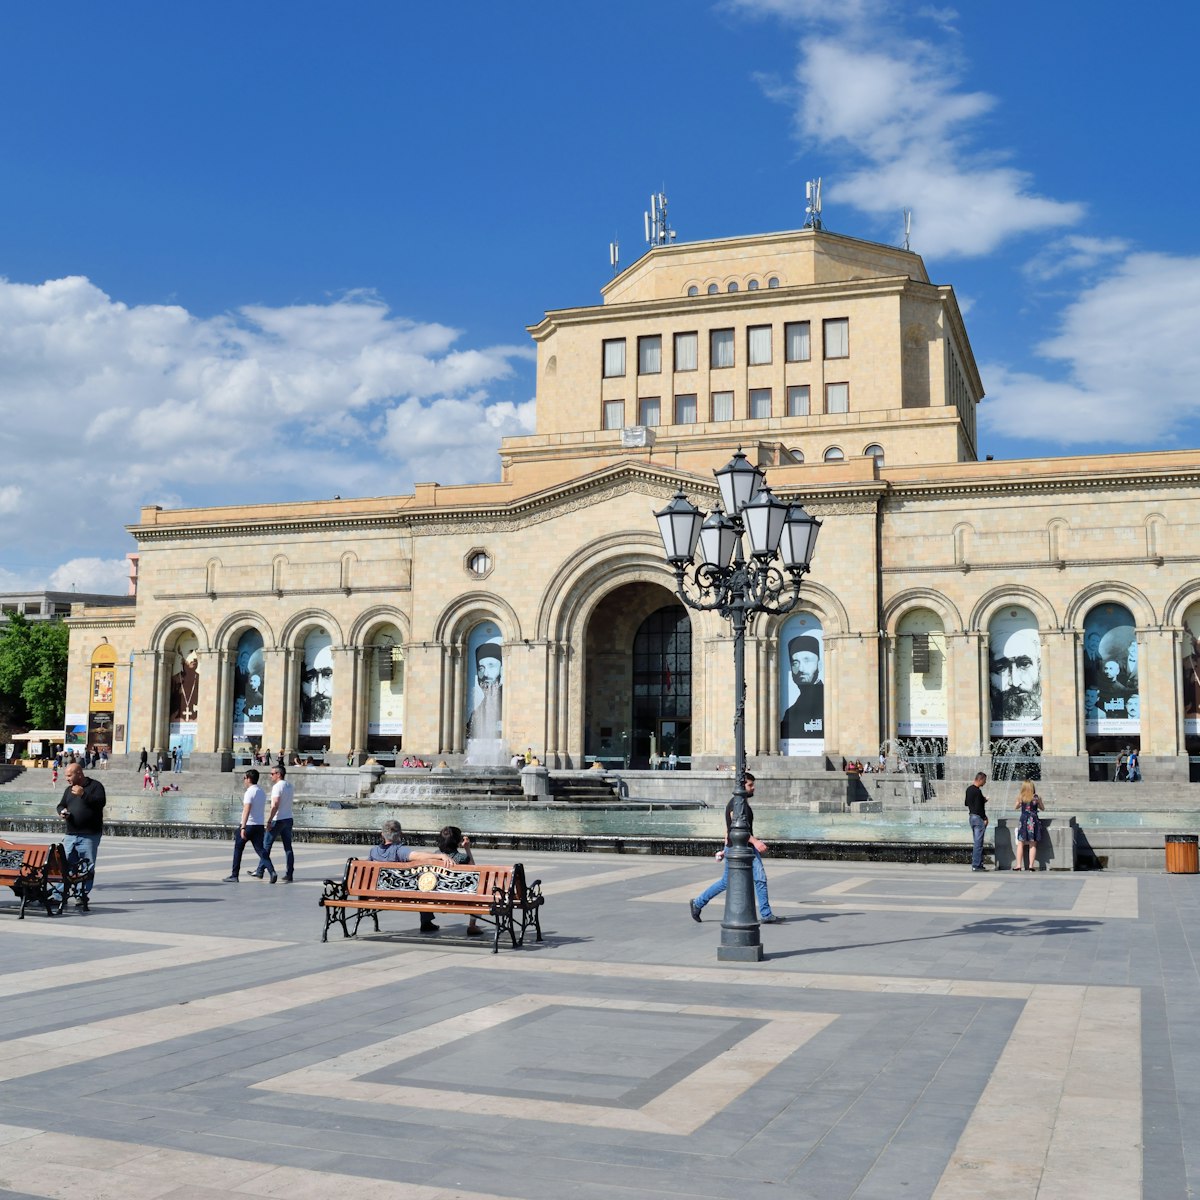 Yerevan, Armenia - May 02, 2015: Republic Square. The National History Museum of Armenia. Was founded in 1919 as Ethnographic-Anthropological Museum-Library. One of main landmarks in city